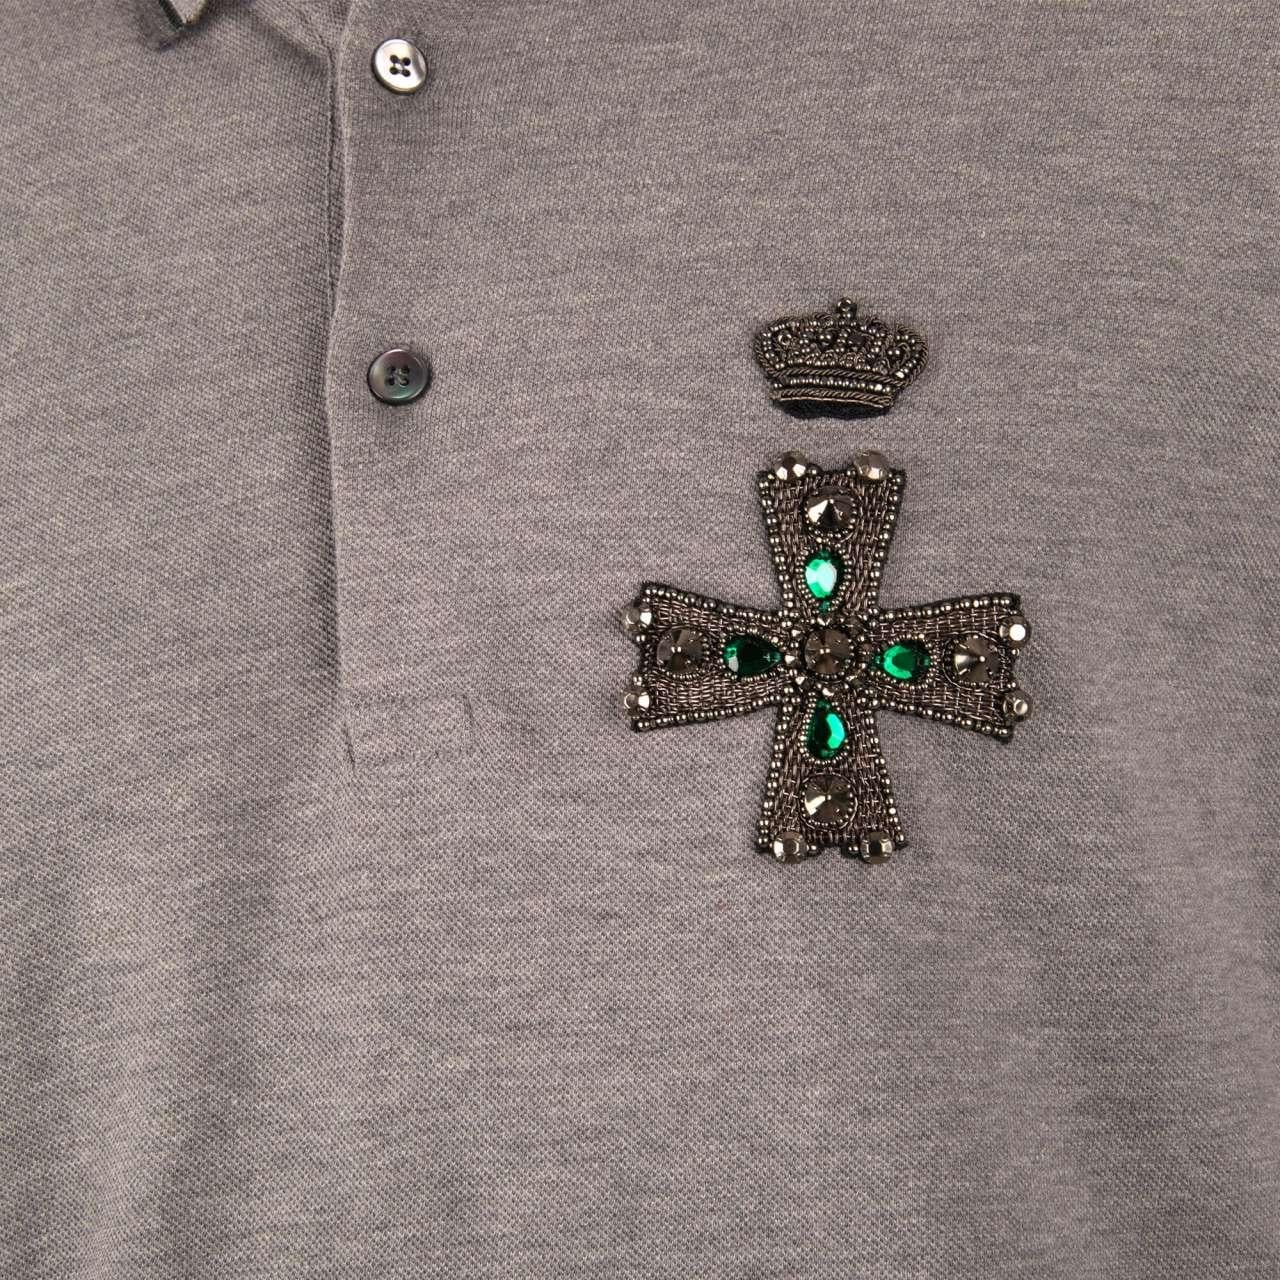 Dolce & Gabbana - Cotton Polo Shirt with Embroidered Crystals Cross Gray 48 M For Sale 2